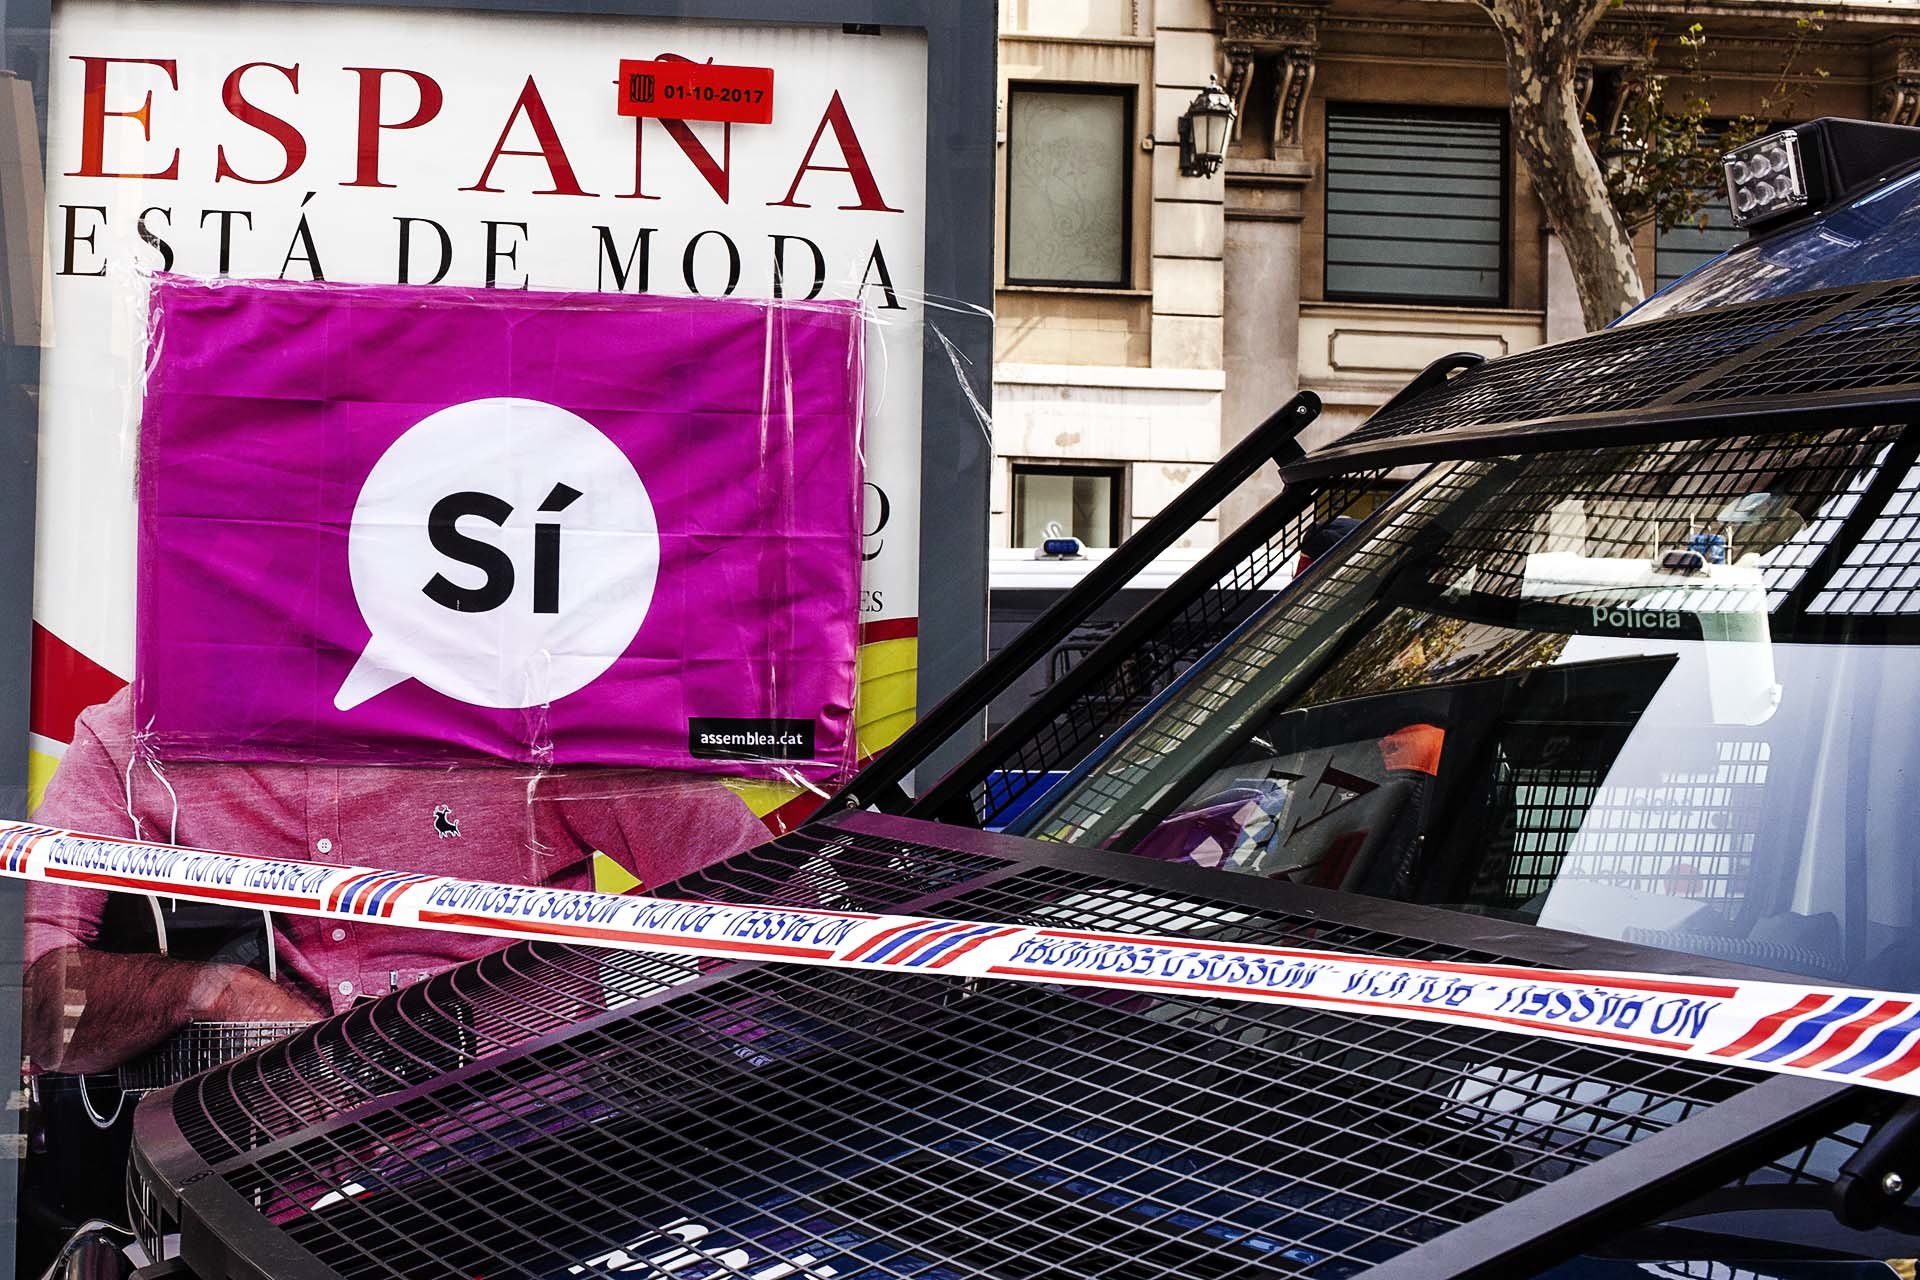 A vehicle of the Mossos de Esquadra, the Catalan autonomous police, before an advertising poster of a Spanish brand that says 